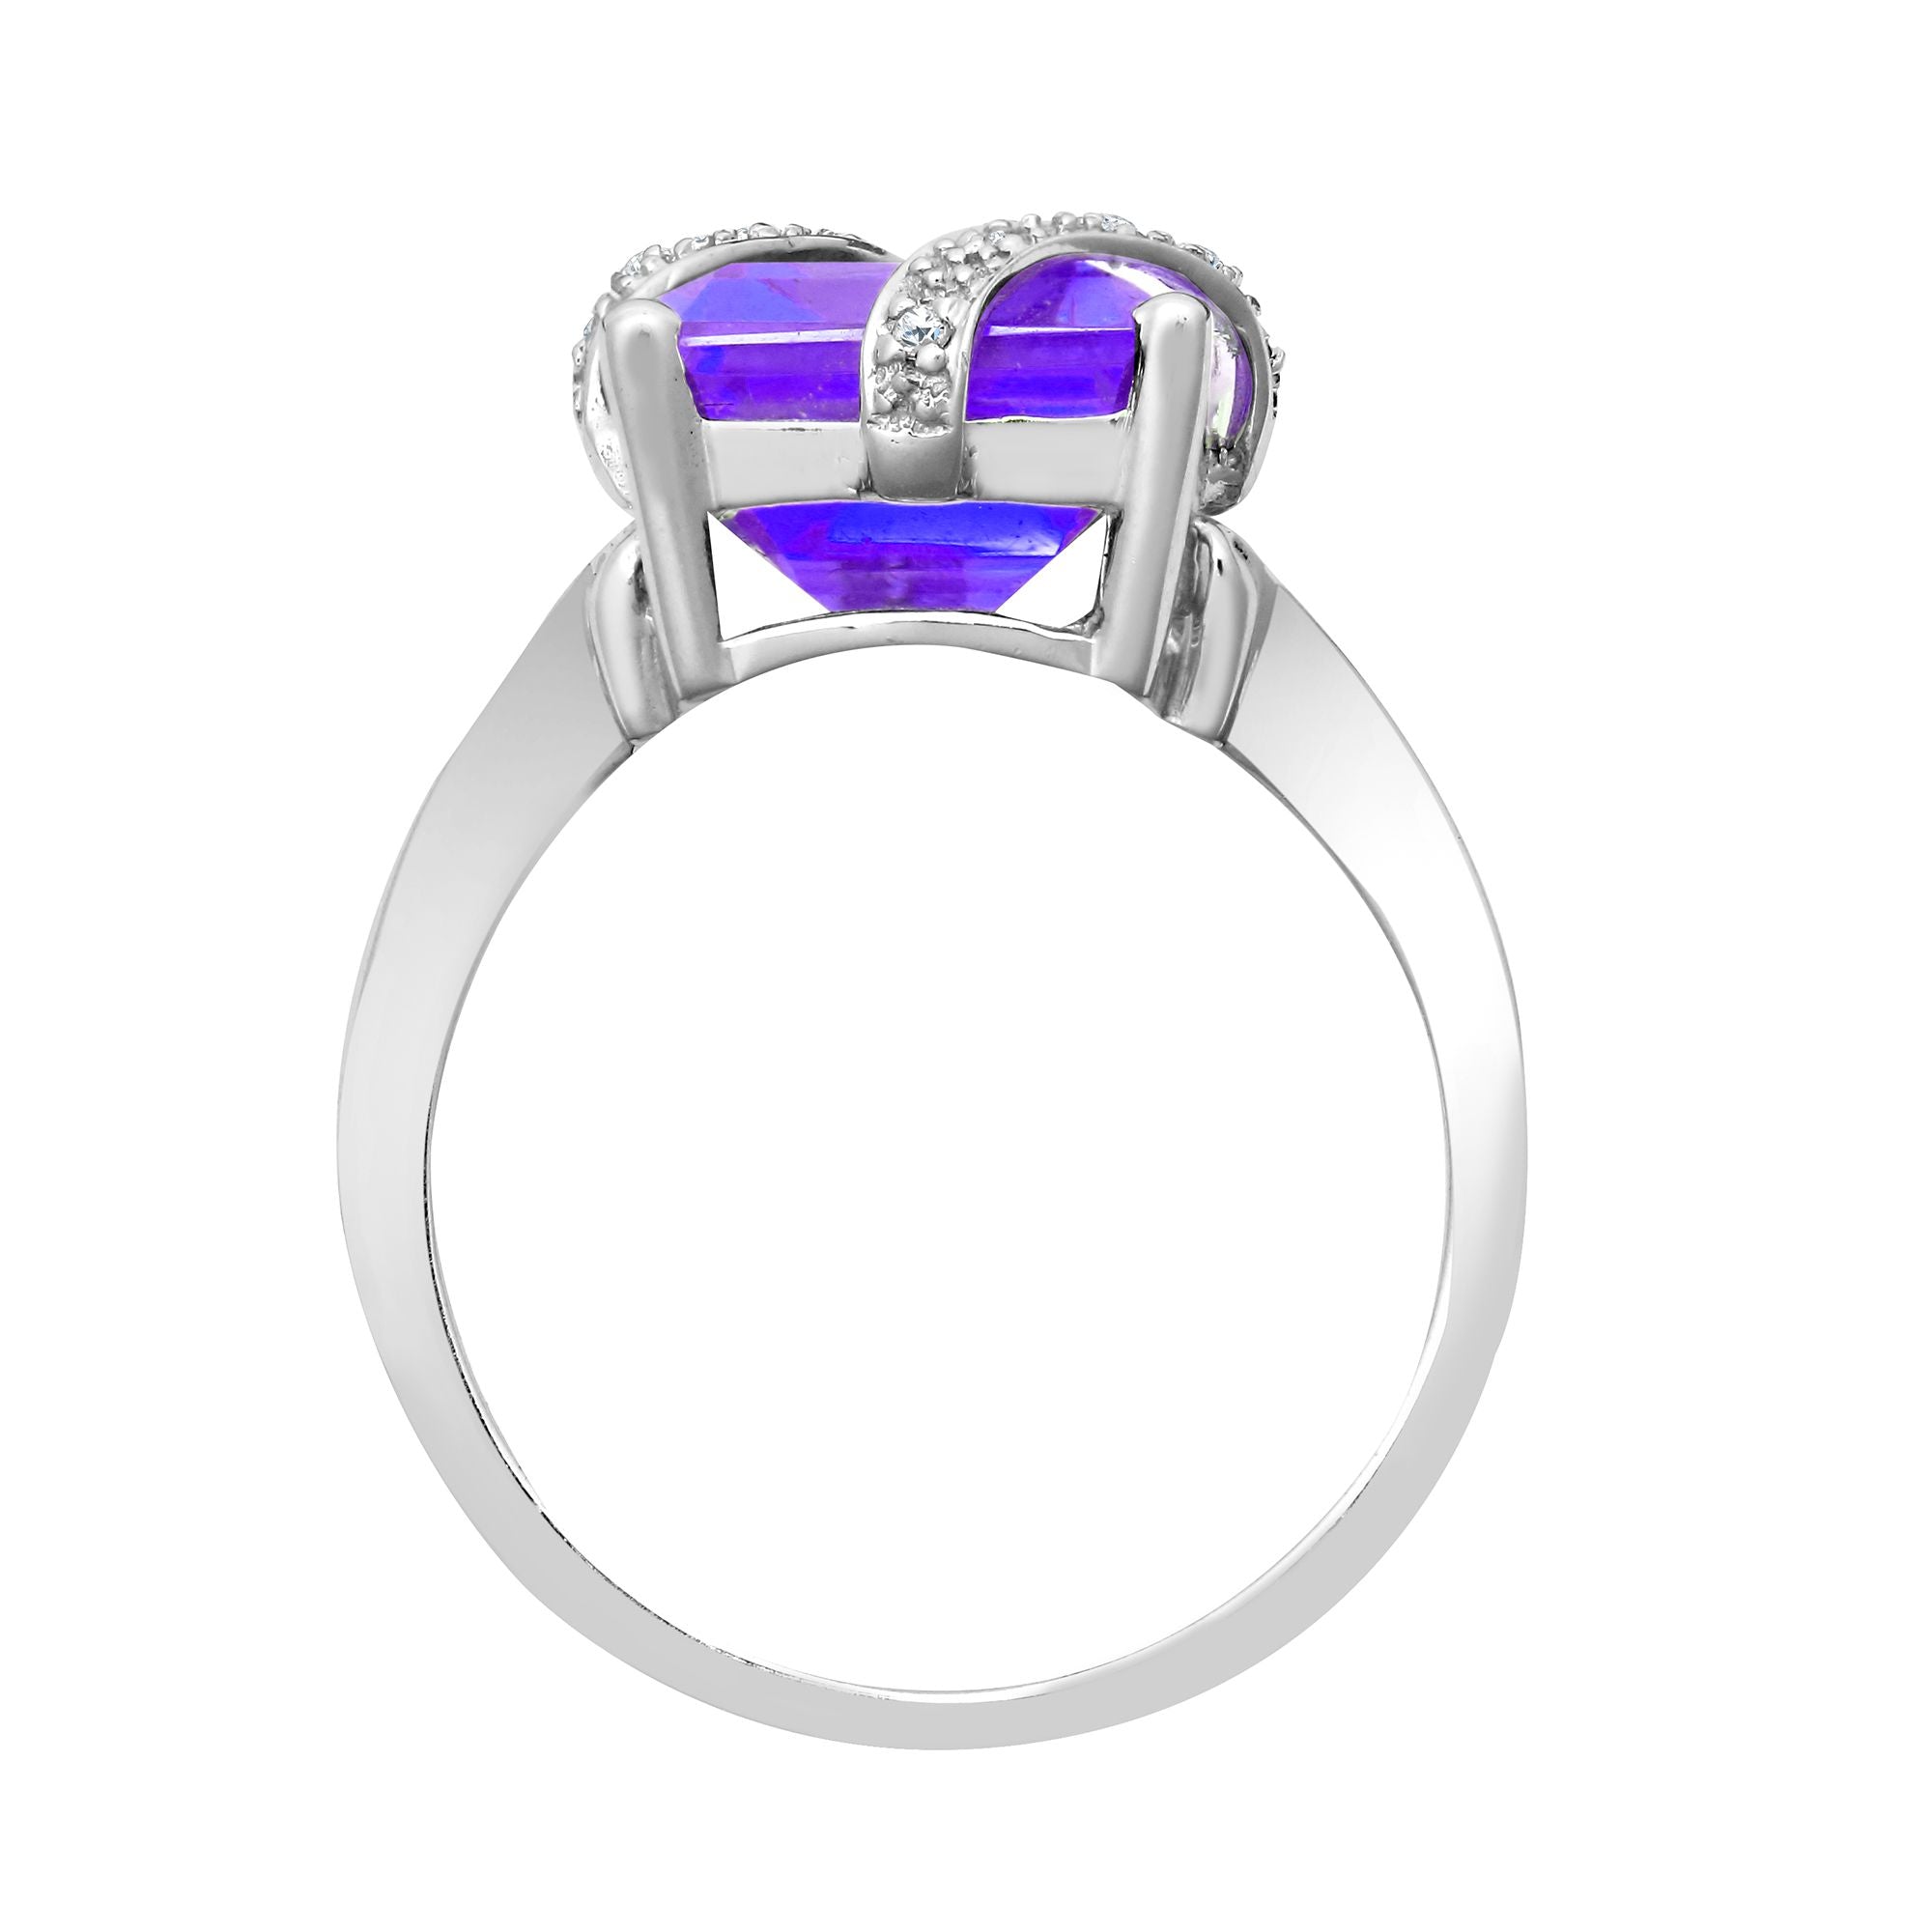 0.04ct Diamond & 7.00ct Amethyst Solitaire Ring 18K White Gold